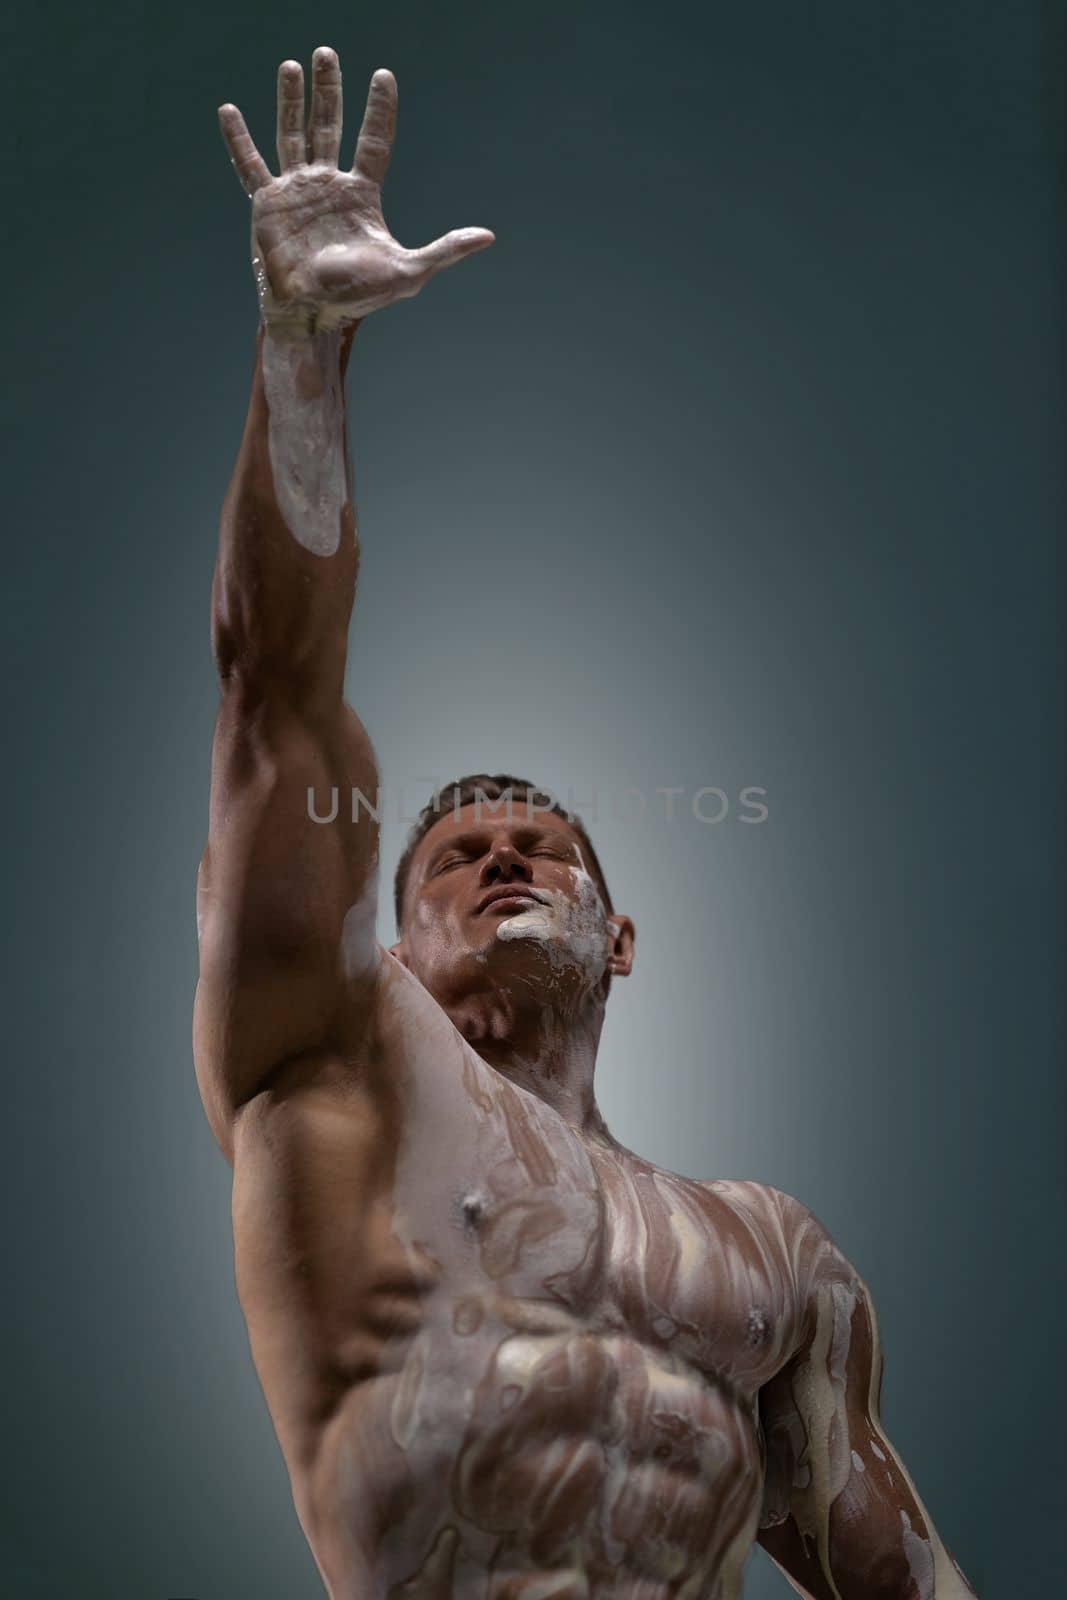 A muscular man with closed eyes motivatingly pulls his hand up with an open palm into the frame. An inspirational pose symbolizing aspiration